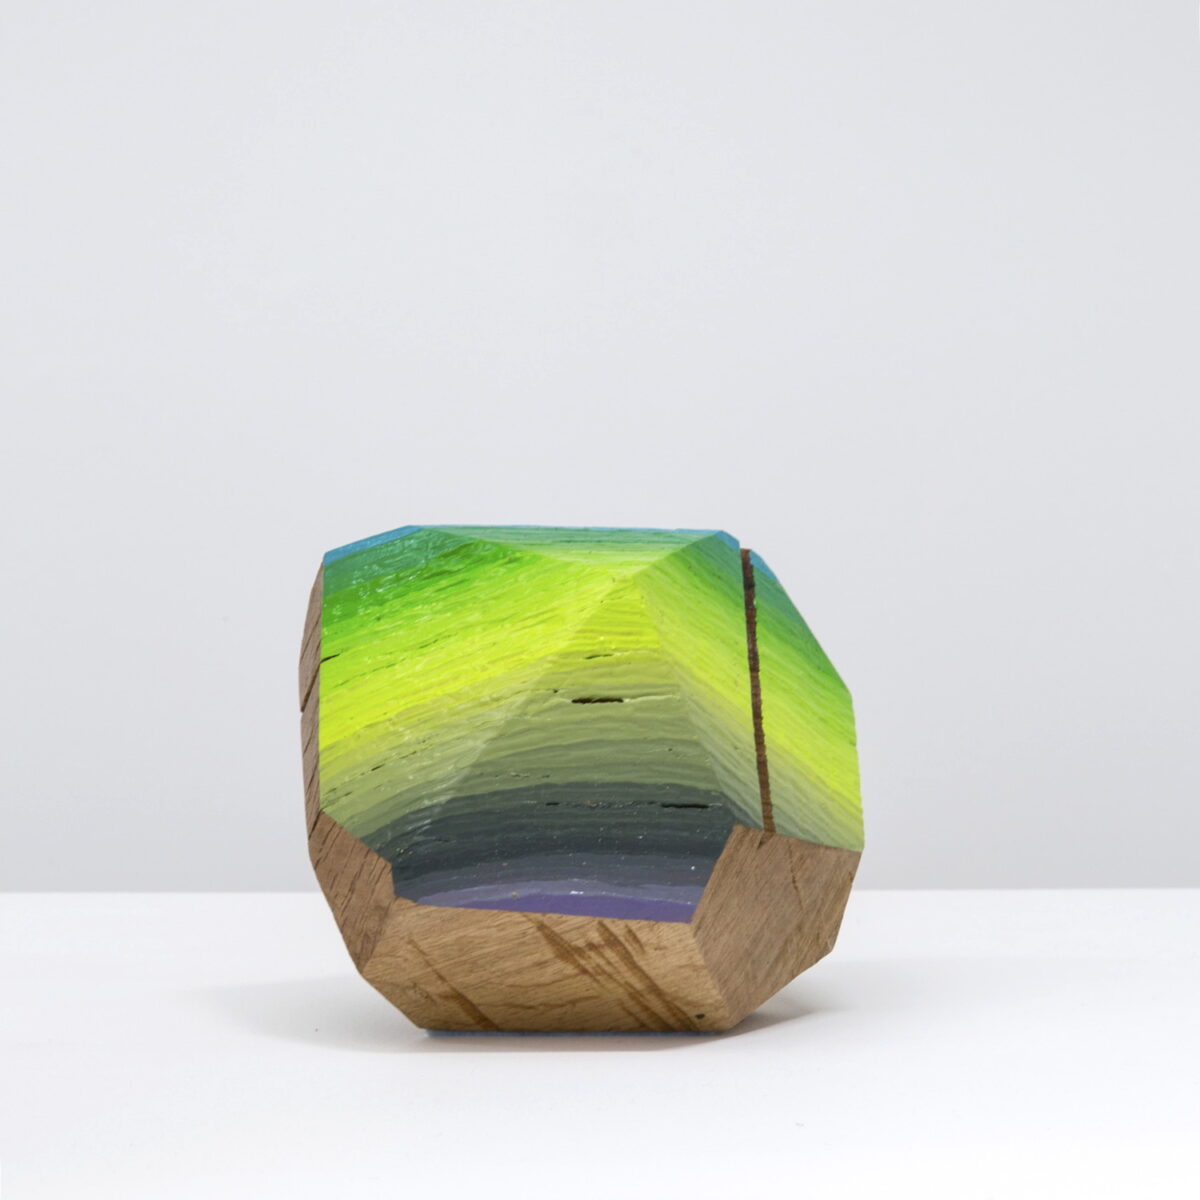 Wood Gemstones Colorful Abstract Sculptures By Victoria Wagner (1)